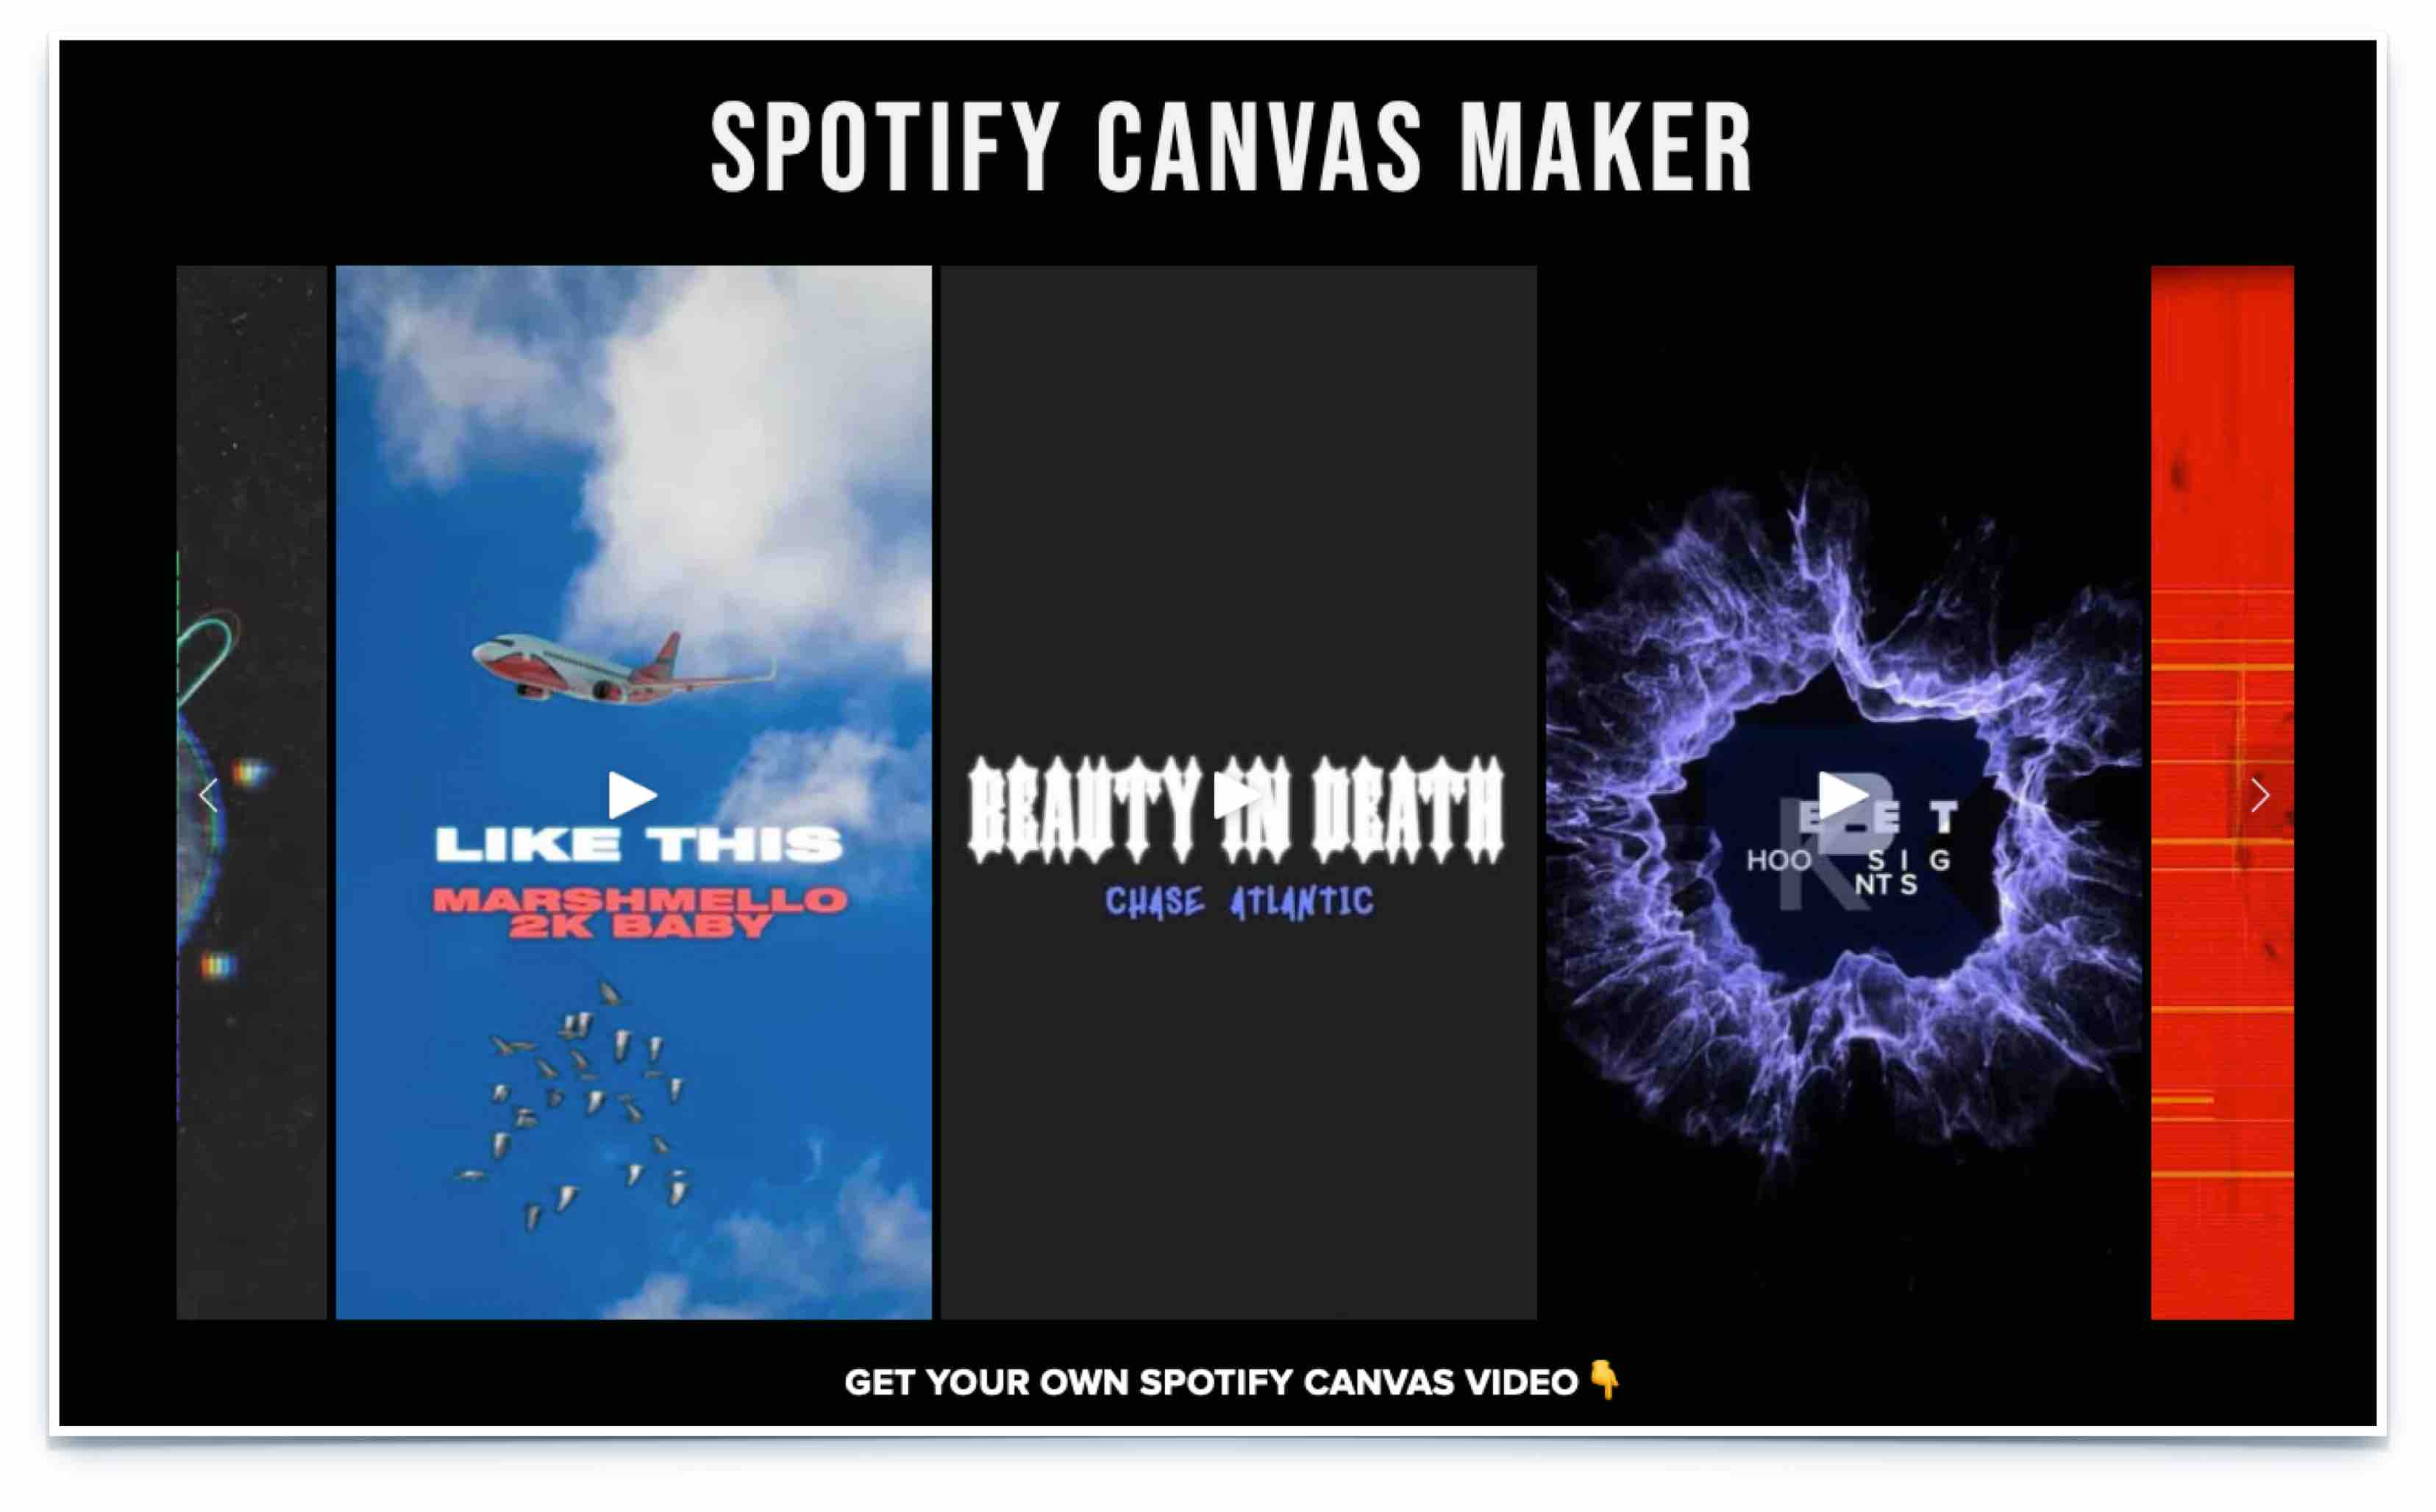 The Best Spotify Canvas Maker!